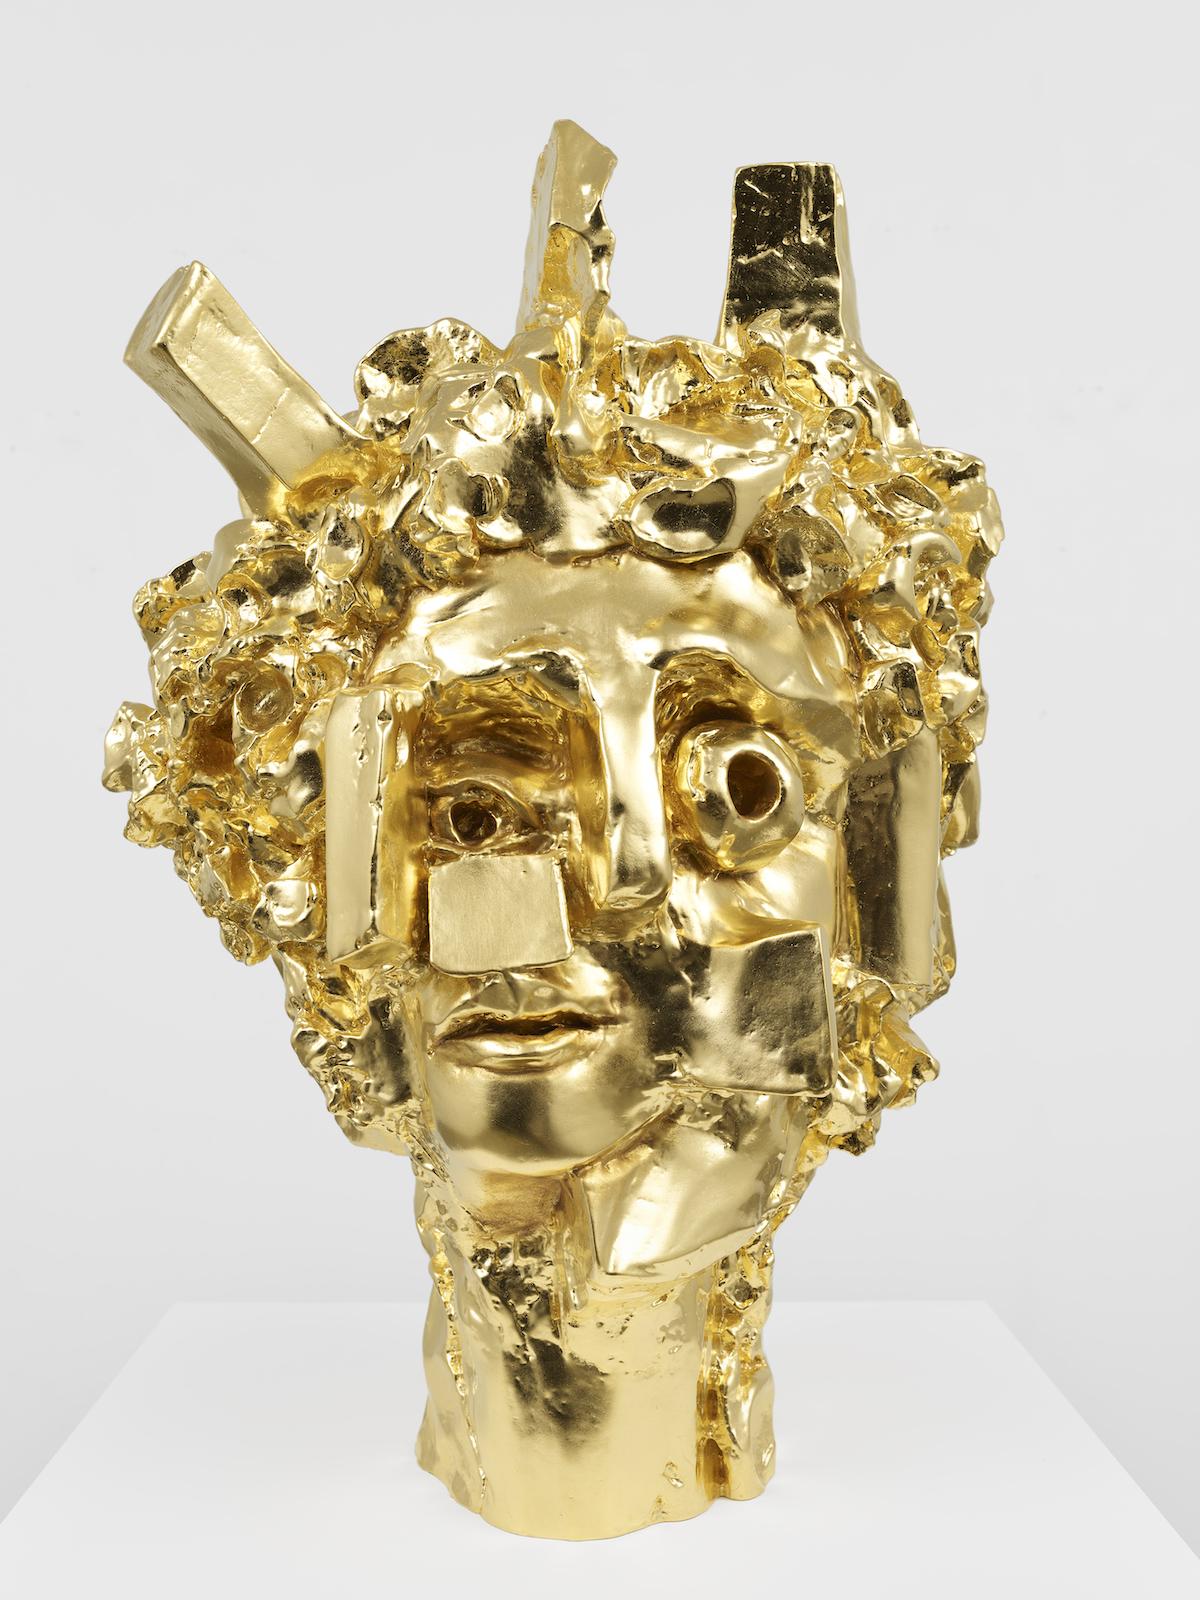  George Condo, Constellation II, 2022. Aluminum, gold leaf, 31 × 21 3/4 × 20 3/4 in, 78.7 × 55.3 × 52.7 cm © George Condo / ARS (Artists Rights Society), New York, 2023.  Photo: Sarah Muehlbauer. Courtesy the artist and Sprüth Magers